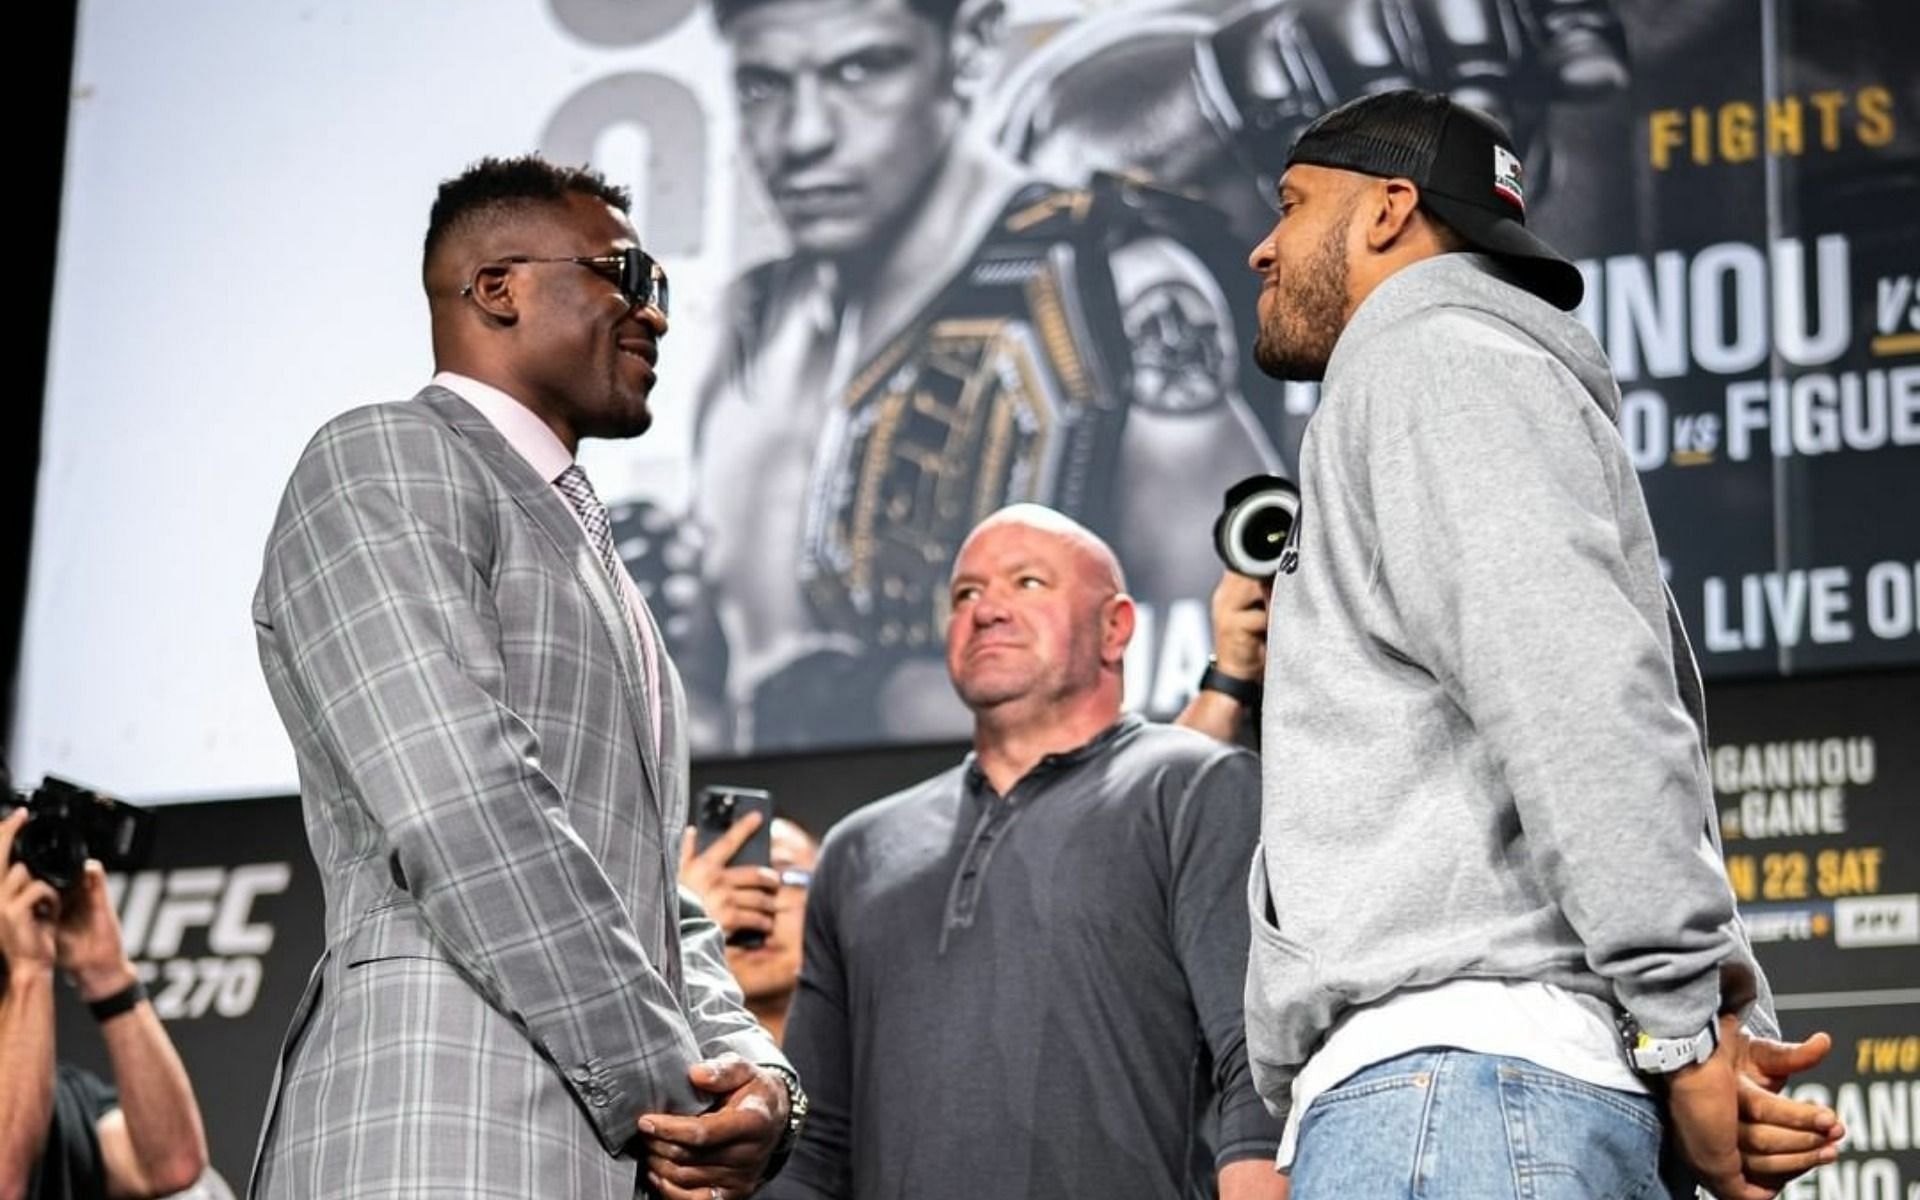 Heavyweights Francis Ngannou (left) and Ciryl Gane (right) face off following the official UFC 270 press conference on Thursday (Image Credit: via @ufc on Instagram)